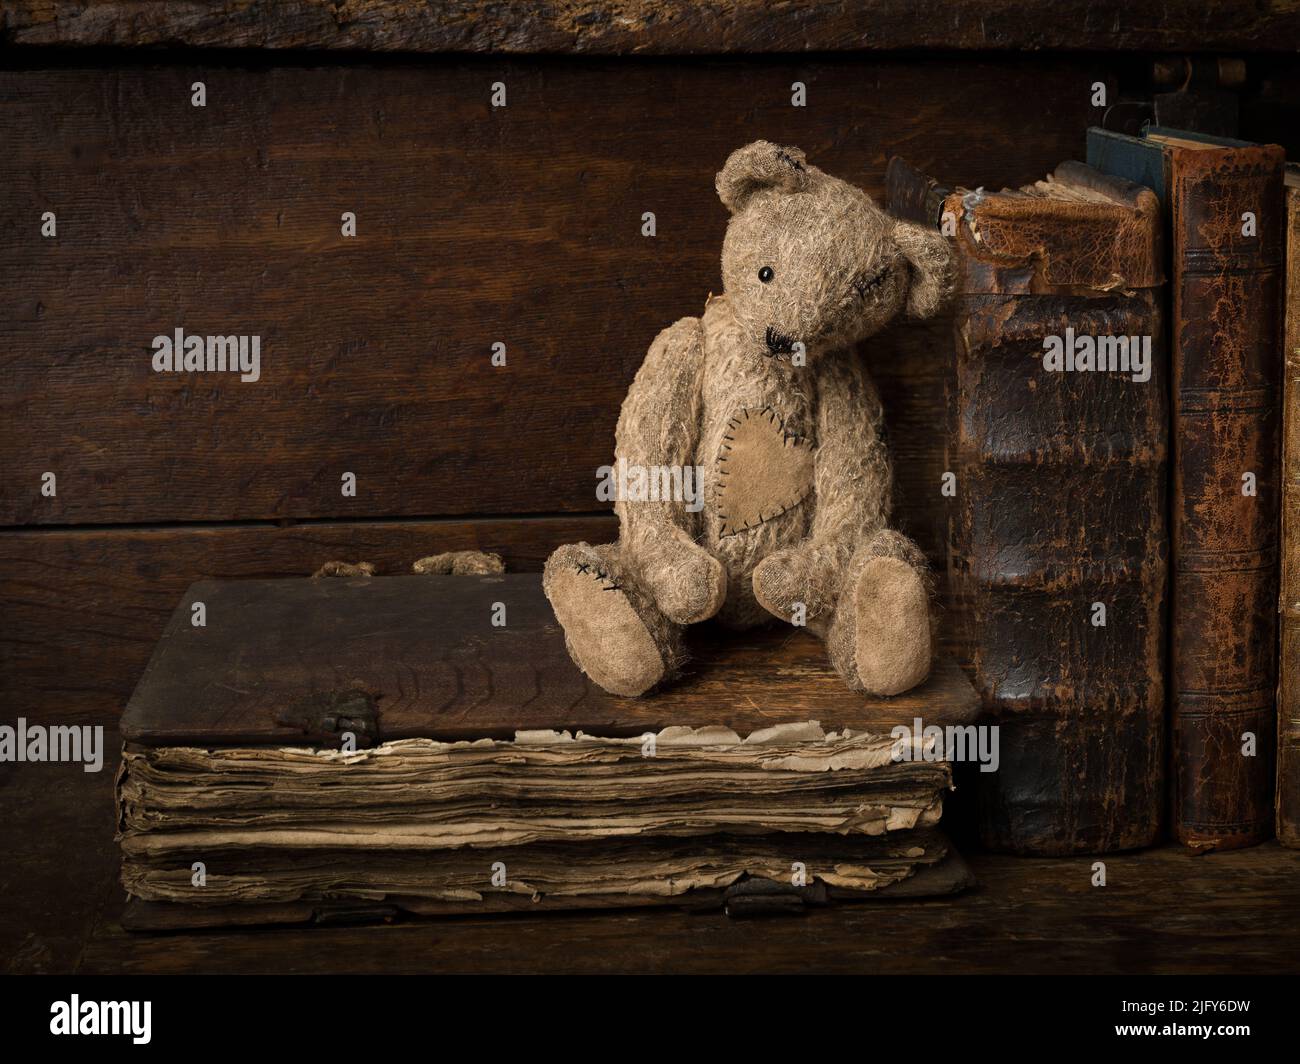 Stacked antique books and a teddy bear on a rustic old wooden shelf. This is suitable for digital compositing. Stock Photo